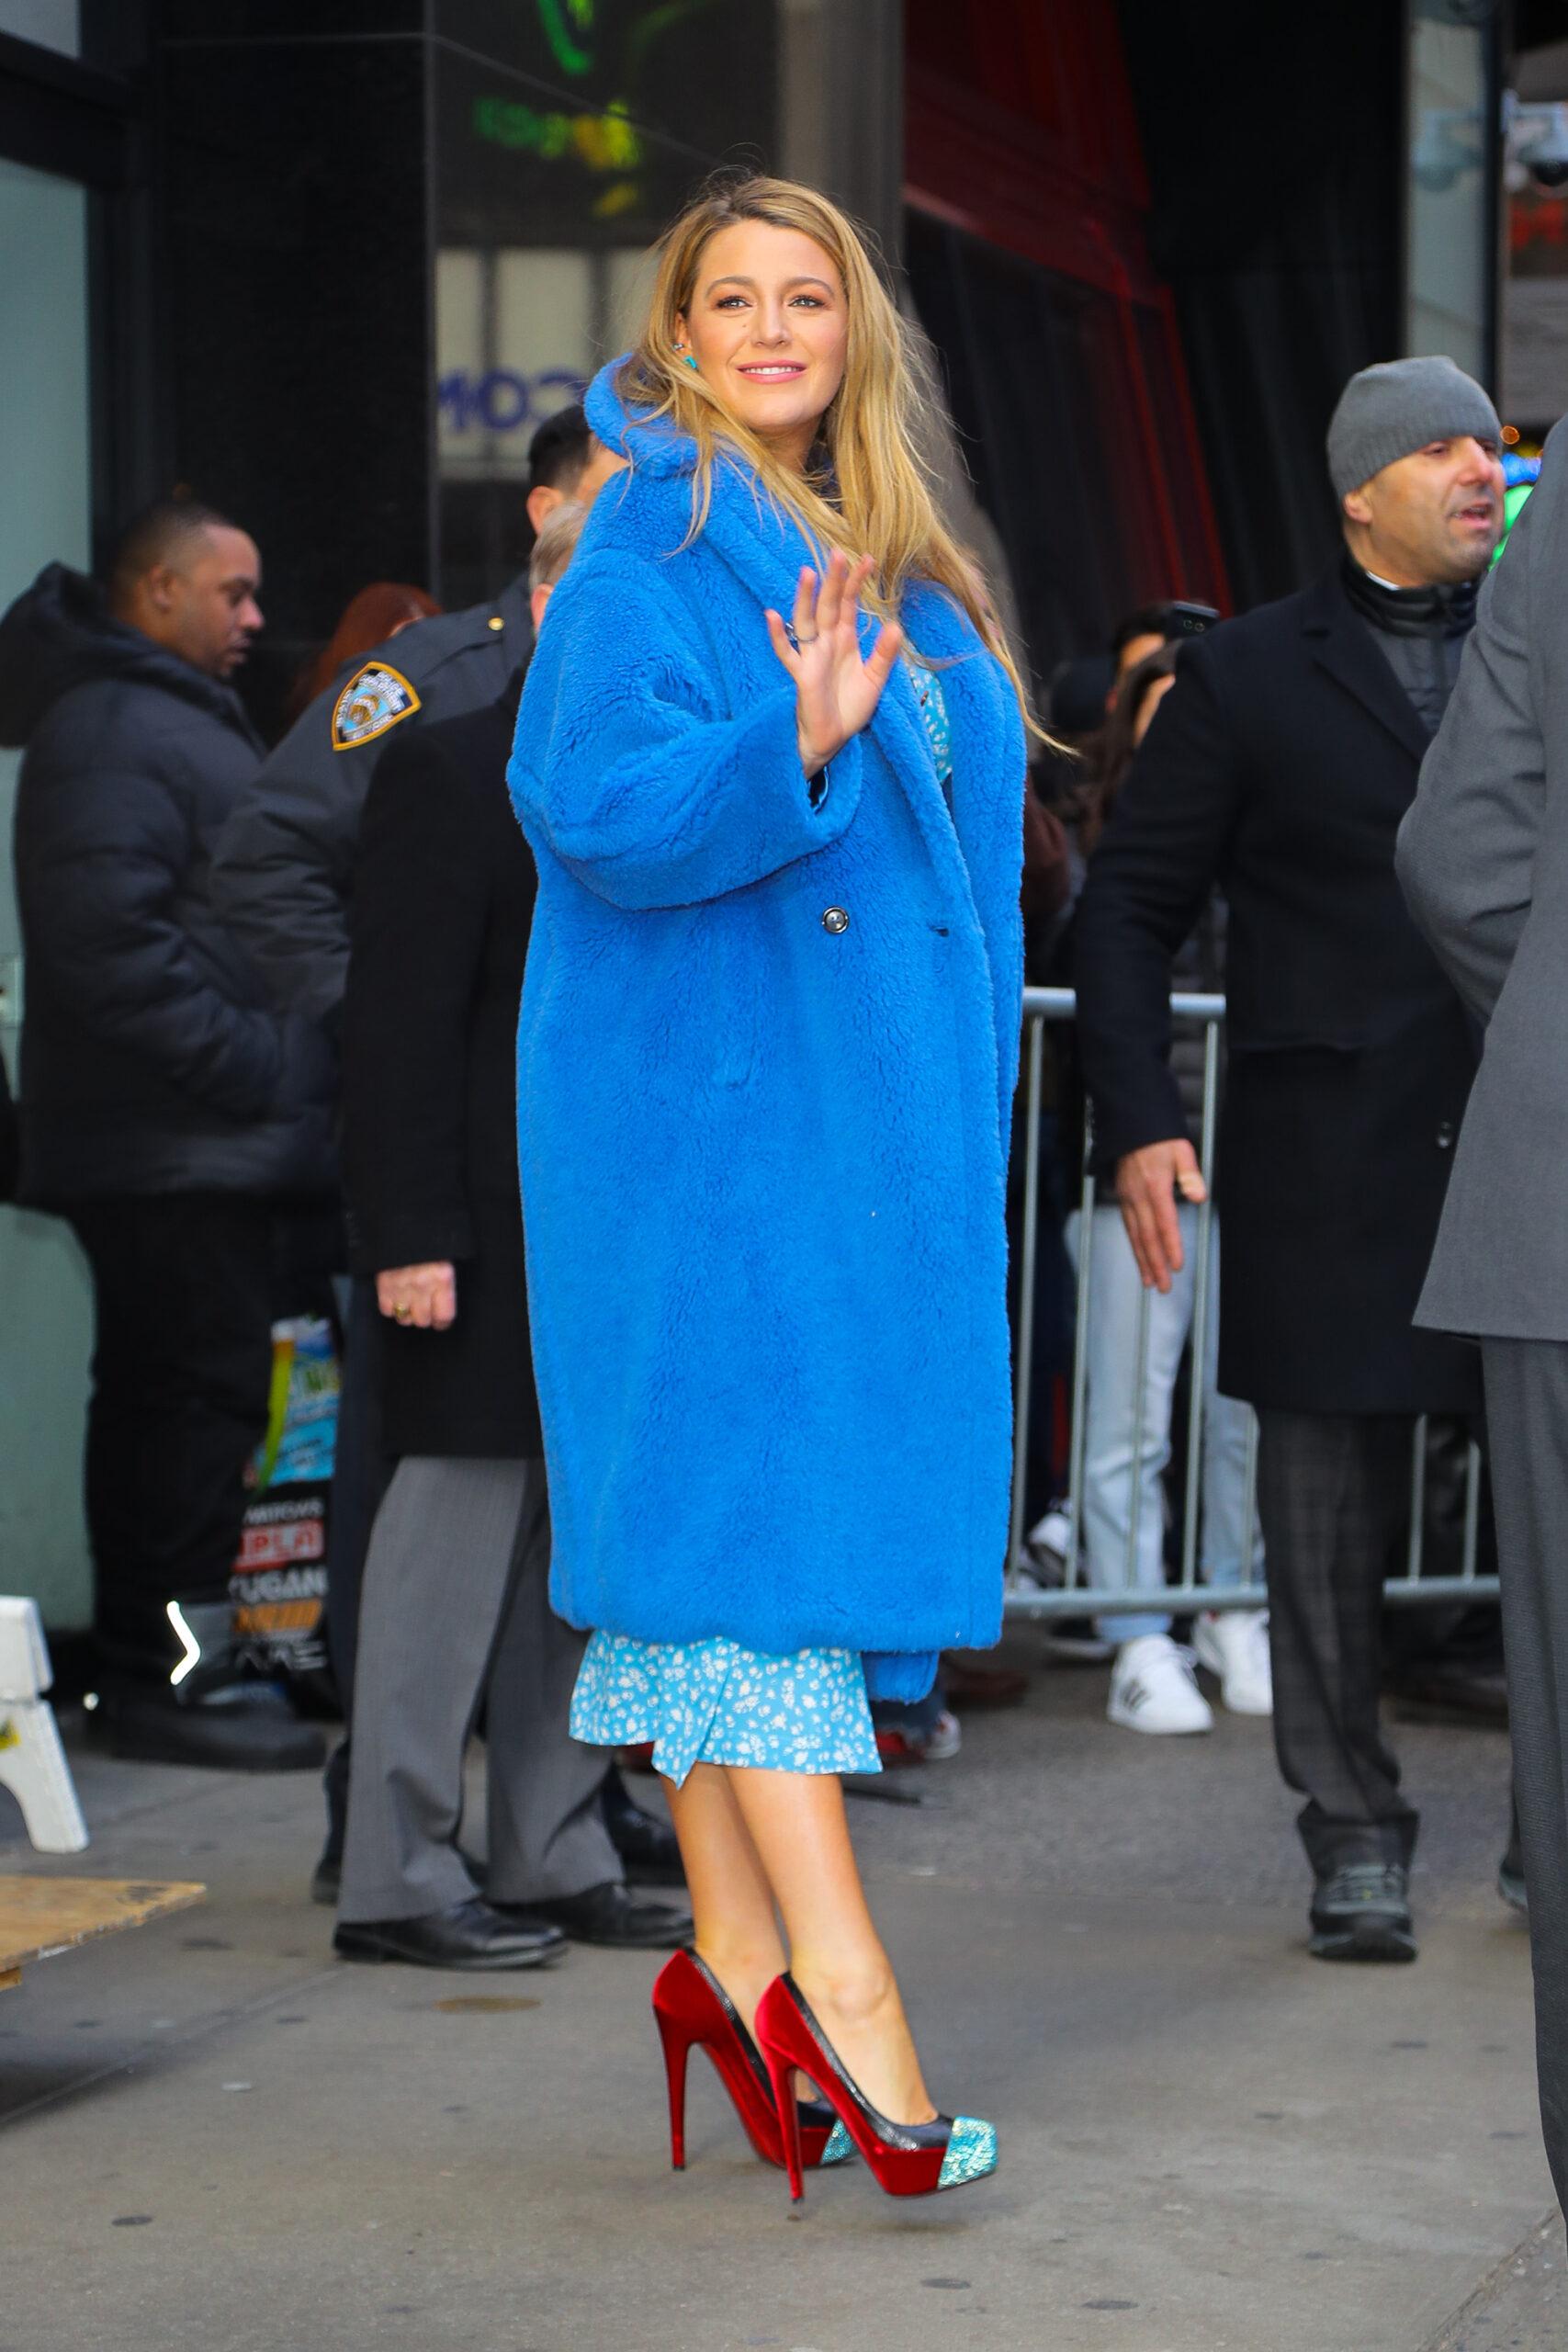 Blake Lively wears a blue fur coat while leaving Good Morning America in NYC